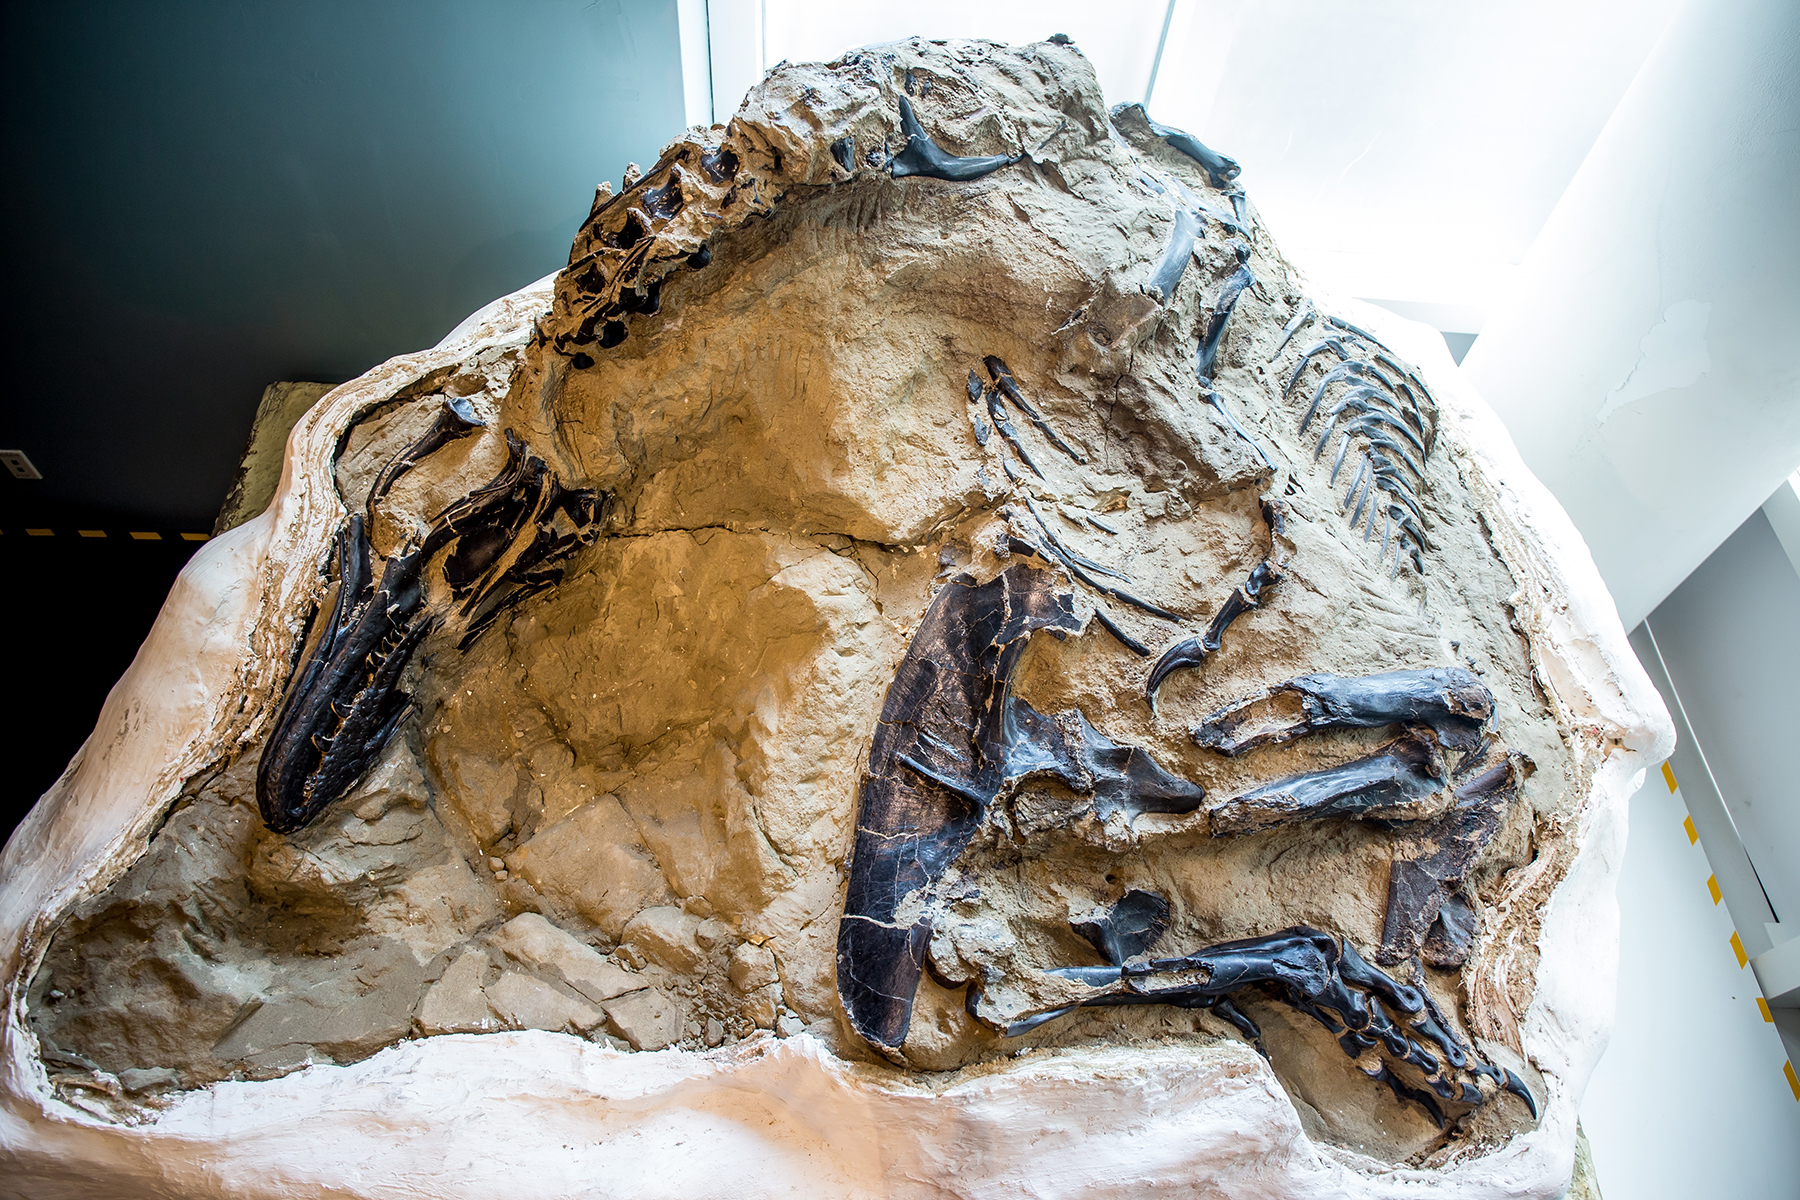 Encased in stone and plaster, the “Dueling Dinosaurs” fossils include one of the most complete skeletons of Tyrannosaurus rex ever unearthed. (Photograph courtesy Matt Zeher)